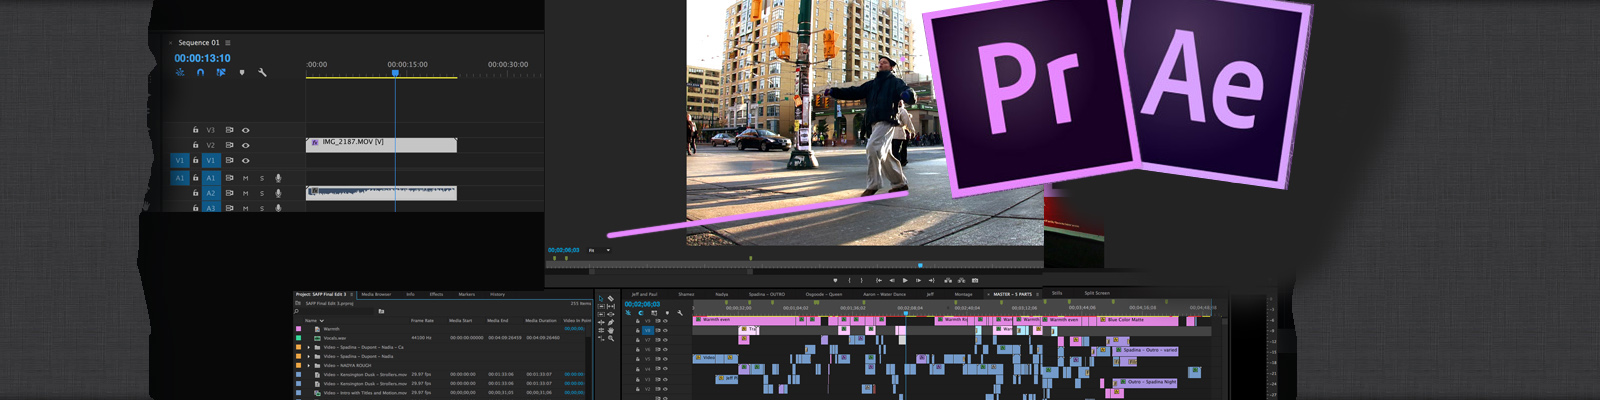 adobe-premiere-after-effects-training-ottawa-government-1